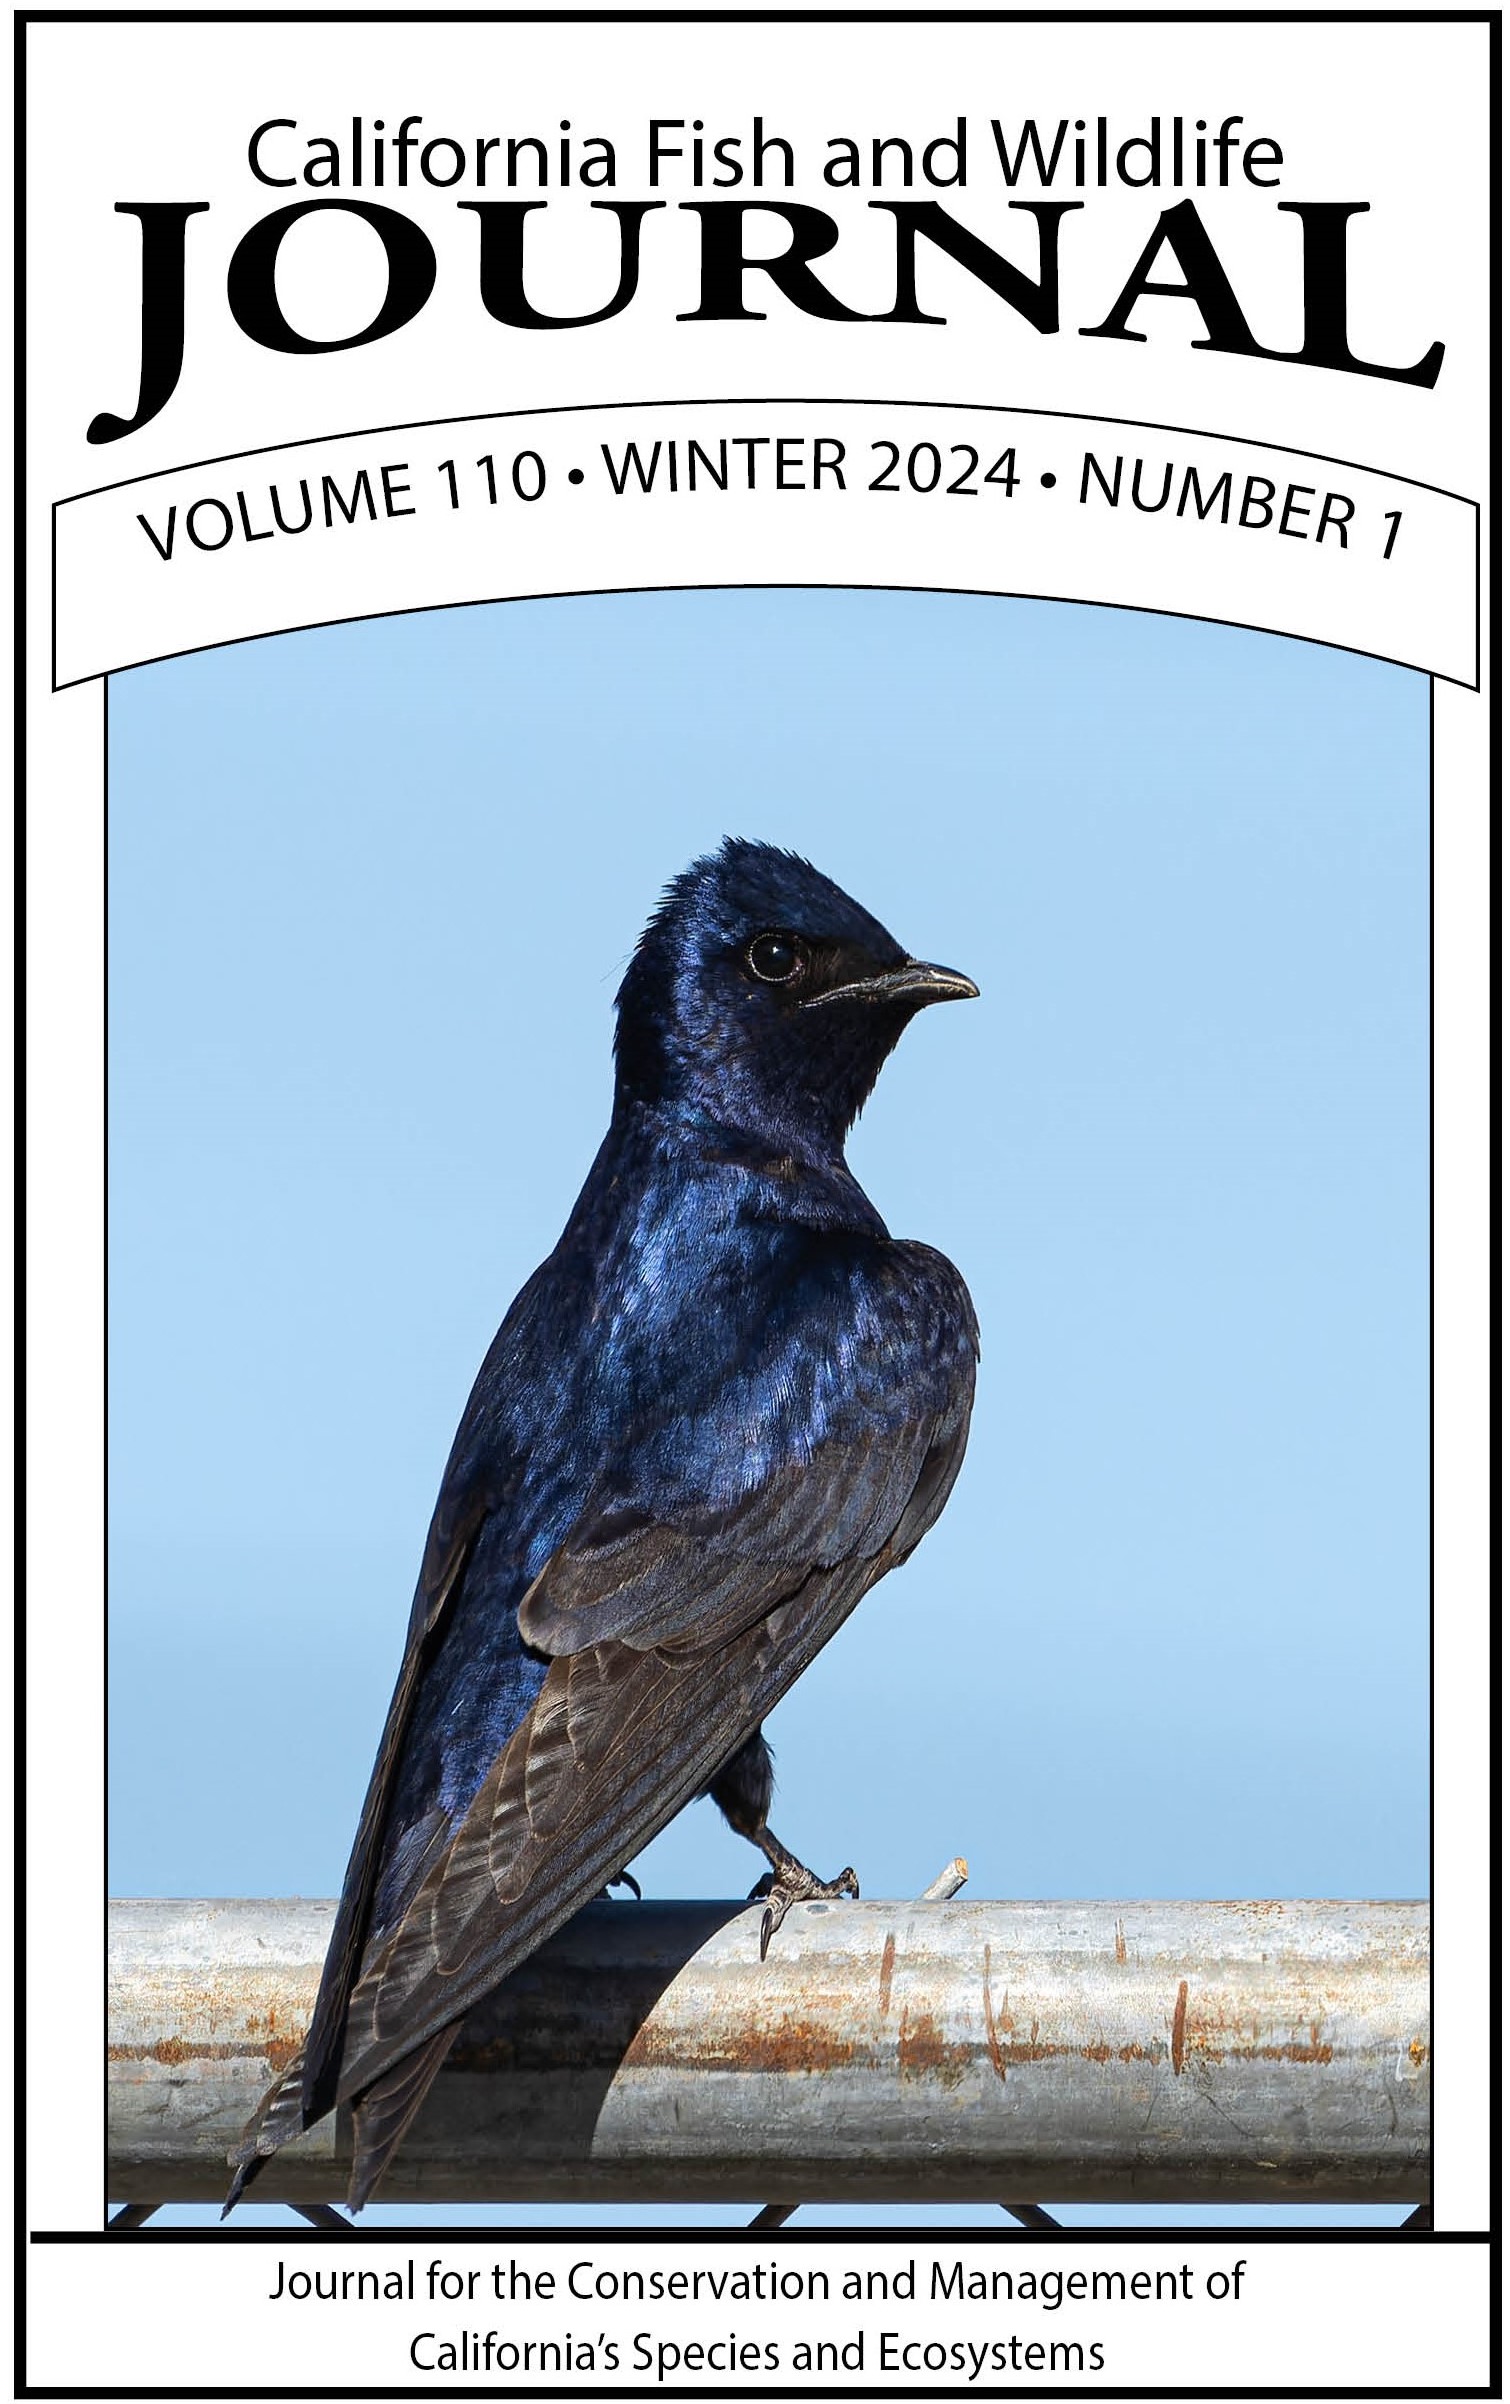 Cover of Issue 110(1) with a purple martin, a medium-size royal blue/purple bird, sitting on a metal fence